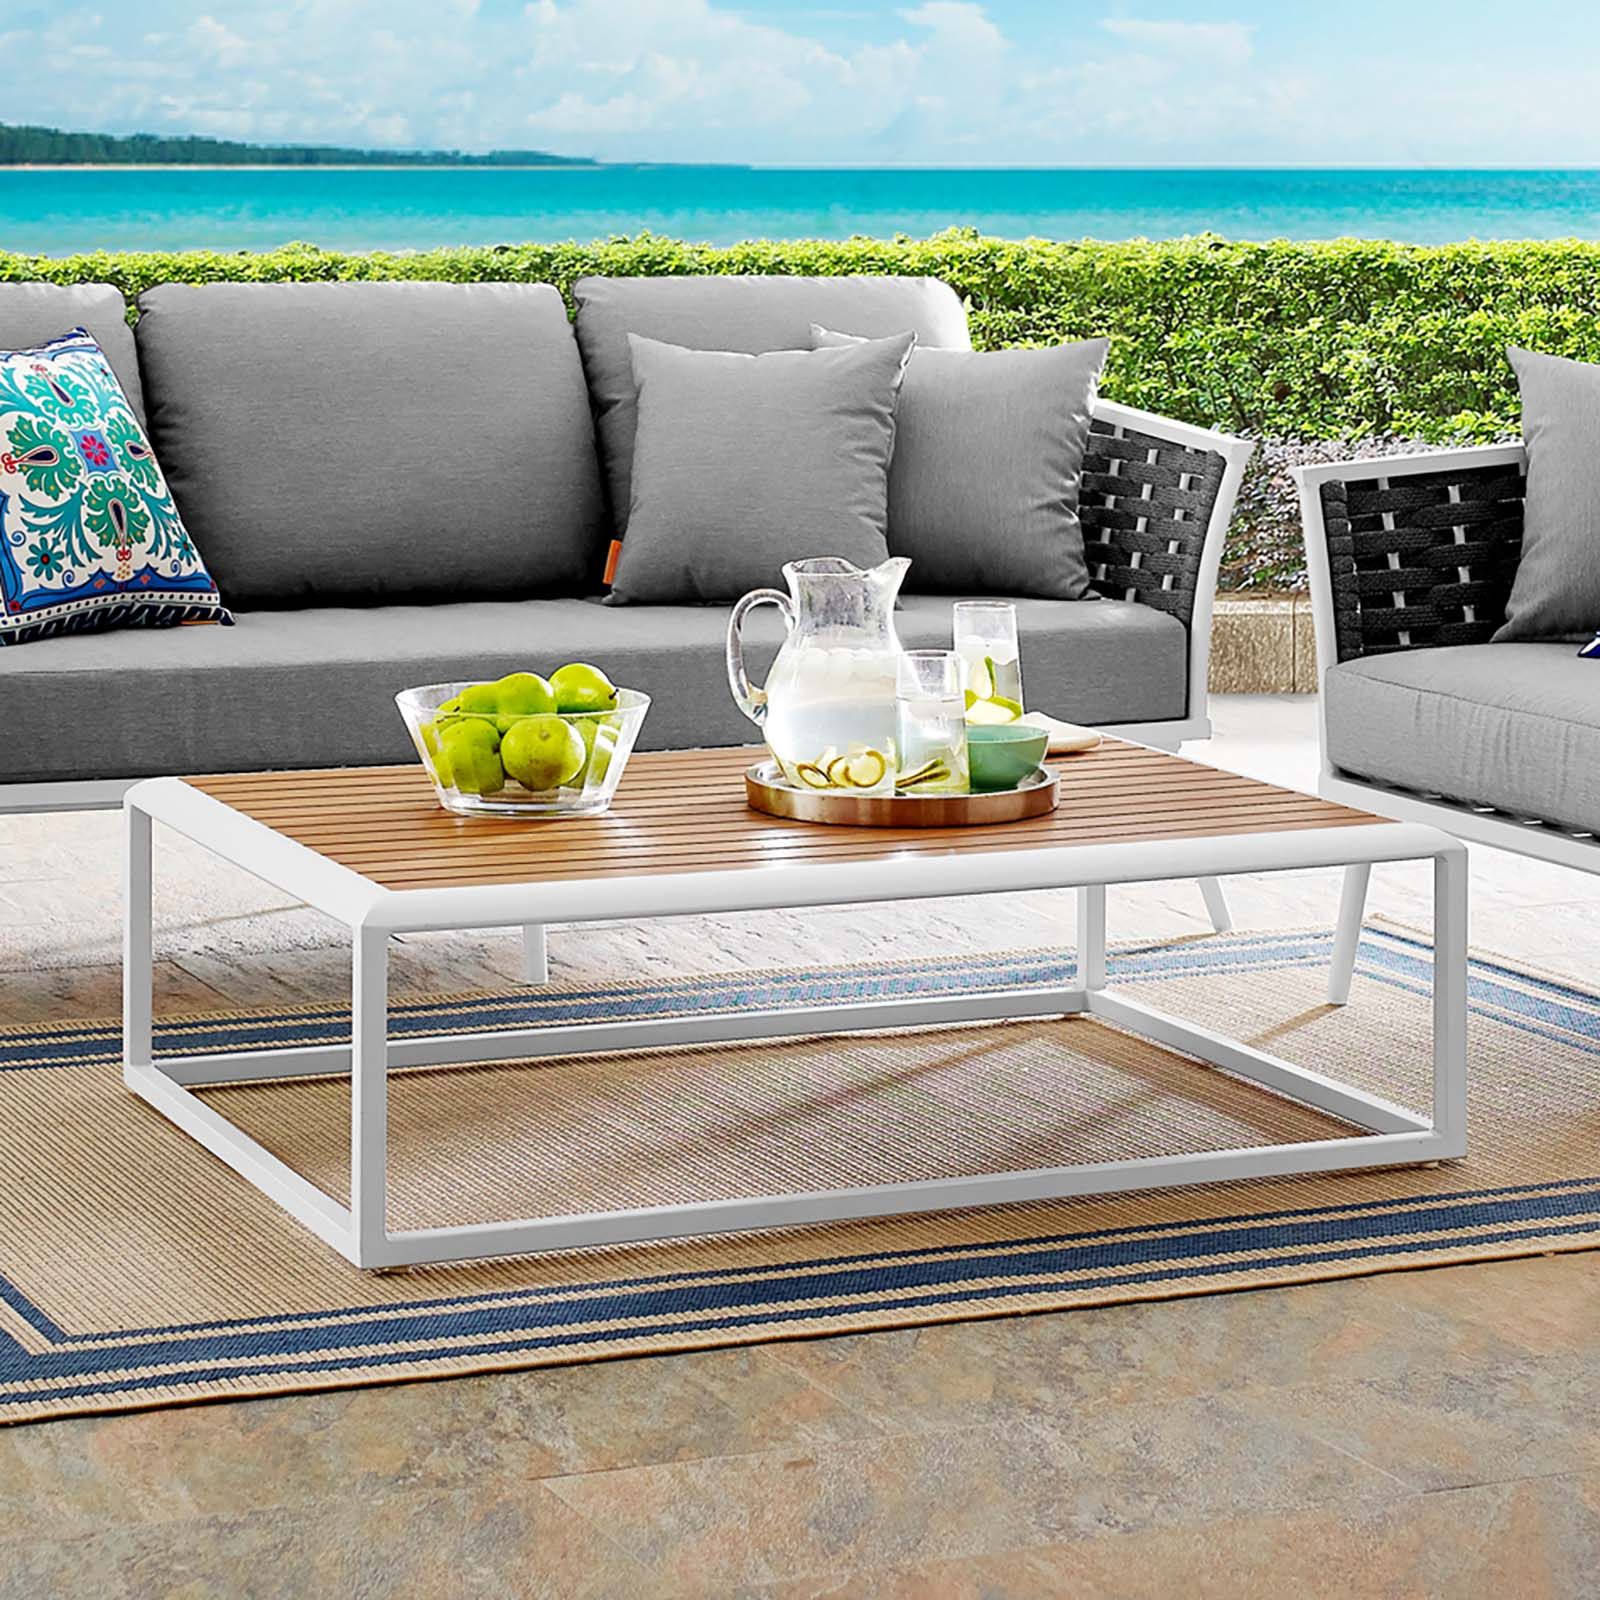 Modterior :: Outdoor :: Coffee Tables :: Stance Outdoor Patio Aluminum Inside Modern Outdoor Patio Coffee Tables (Gallery 5 of 20)